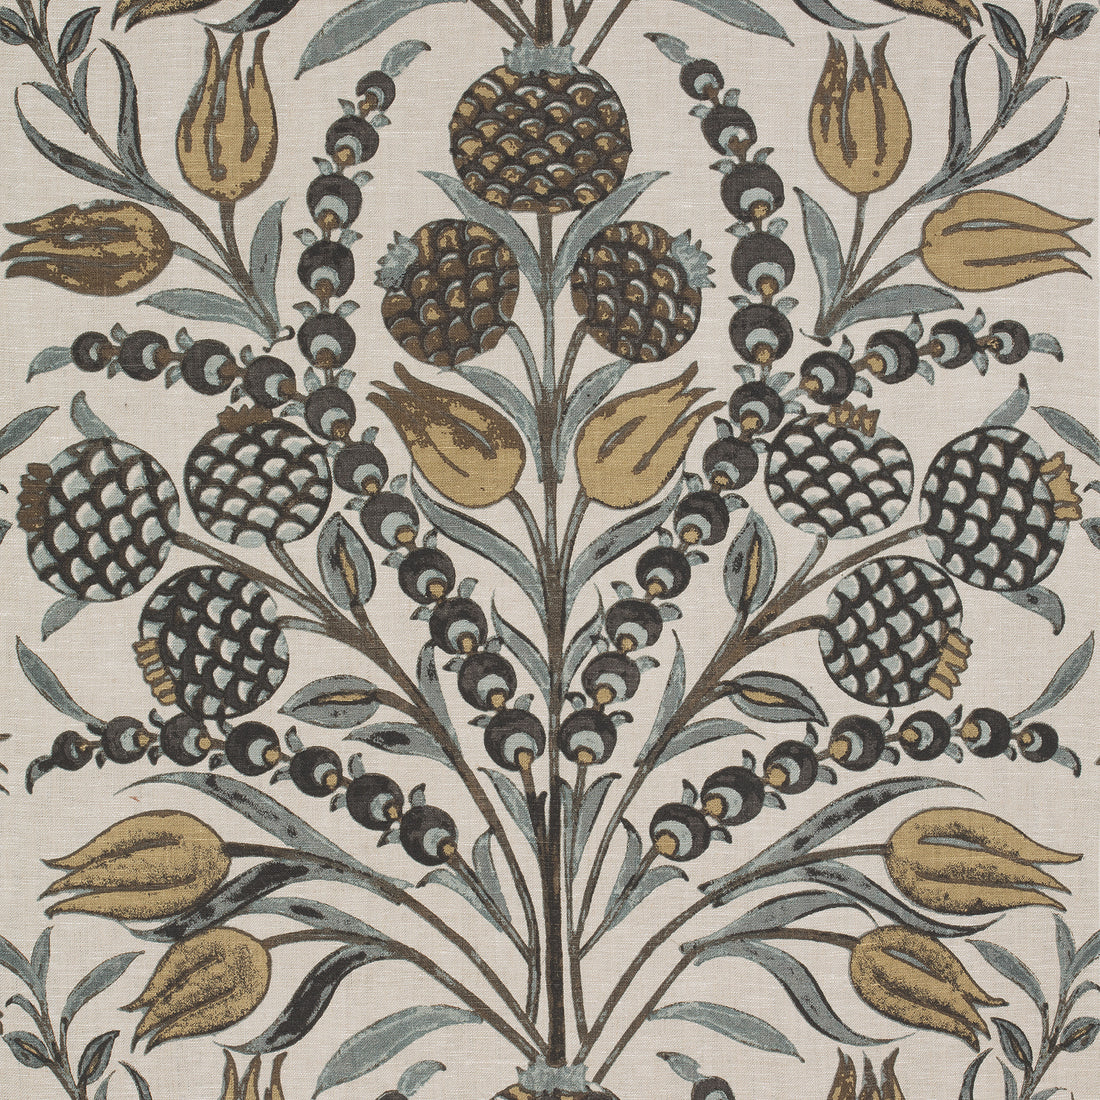 Corneila fabric in grey and gold color - pattern number F972604 - by Thibaut in the Chestnut Hill collection